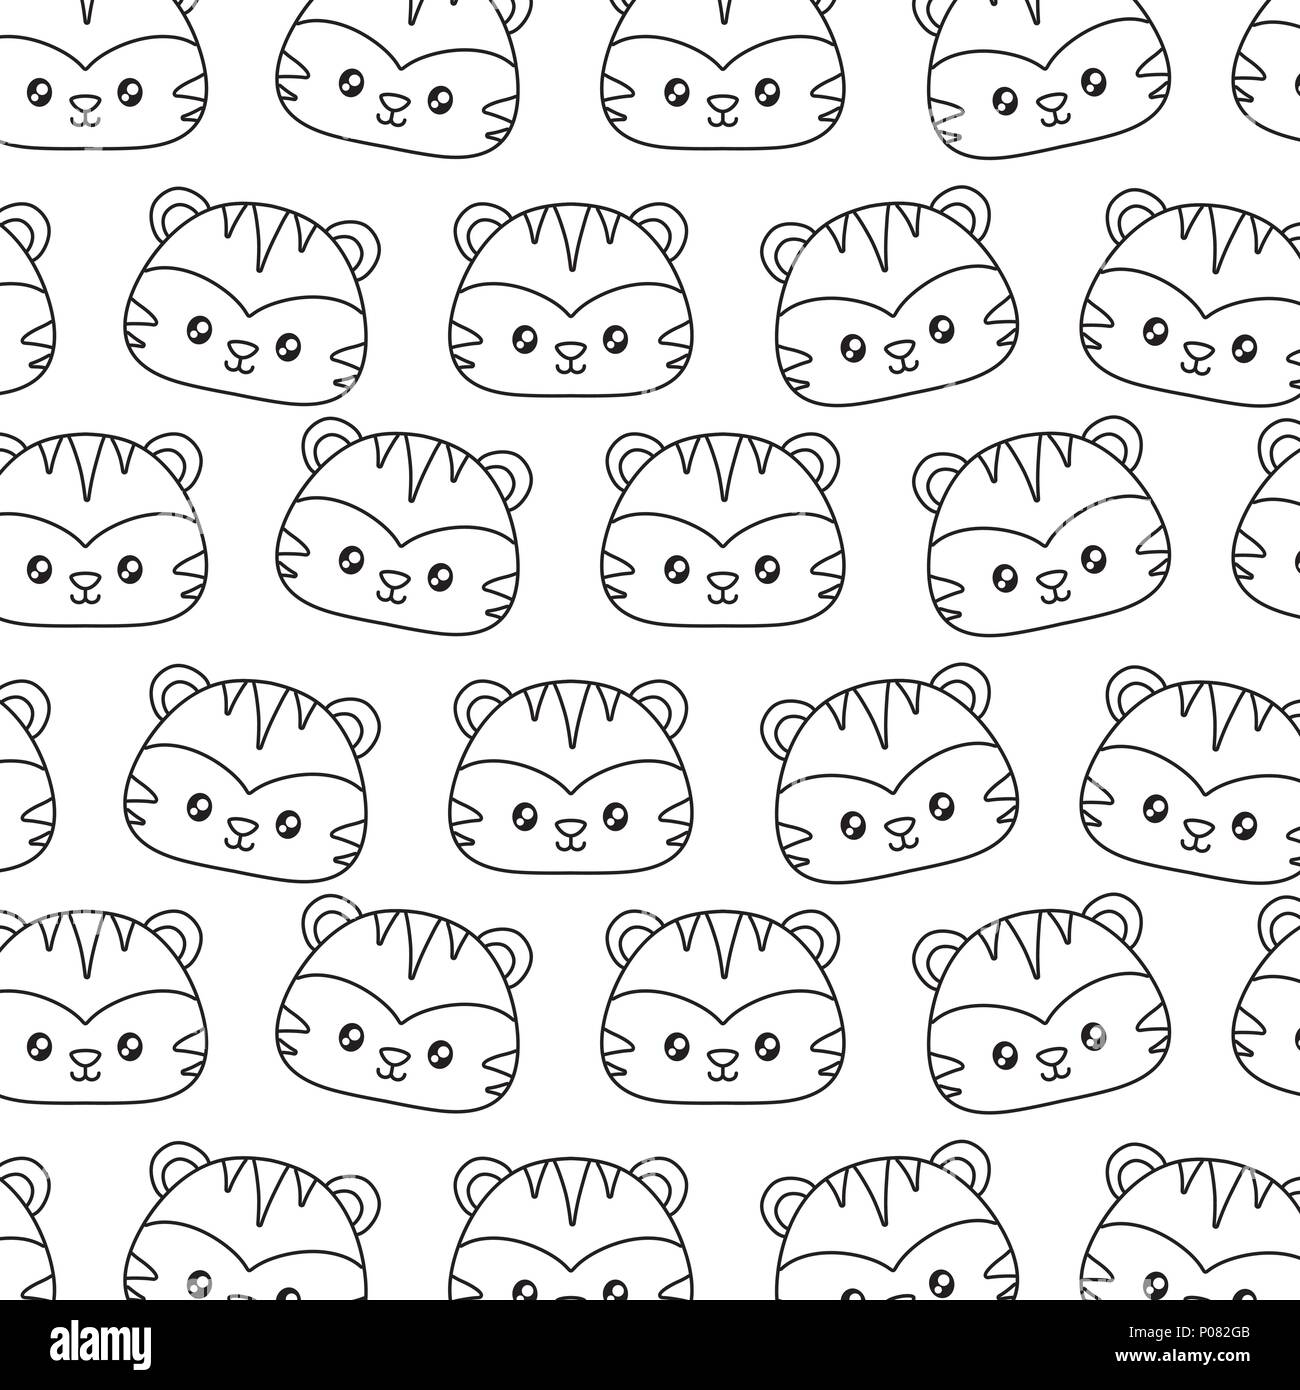 Background Of Cute Tigers Pattern Vector Illustration Stock